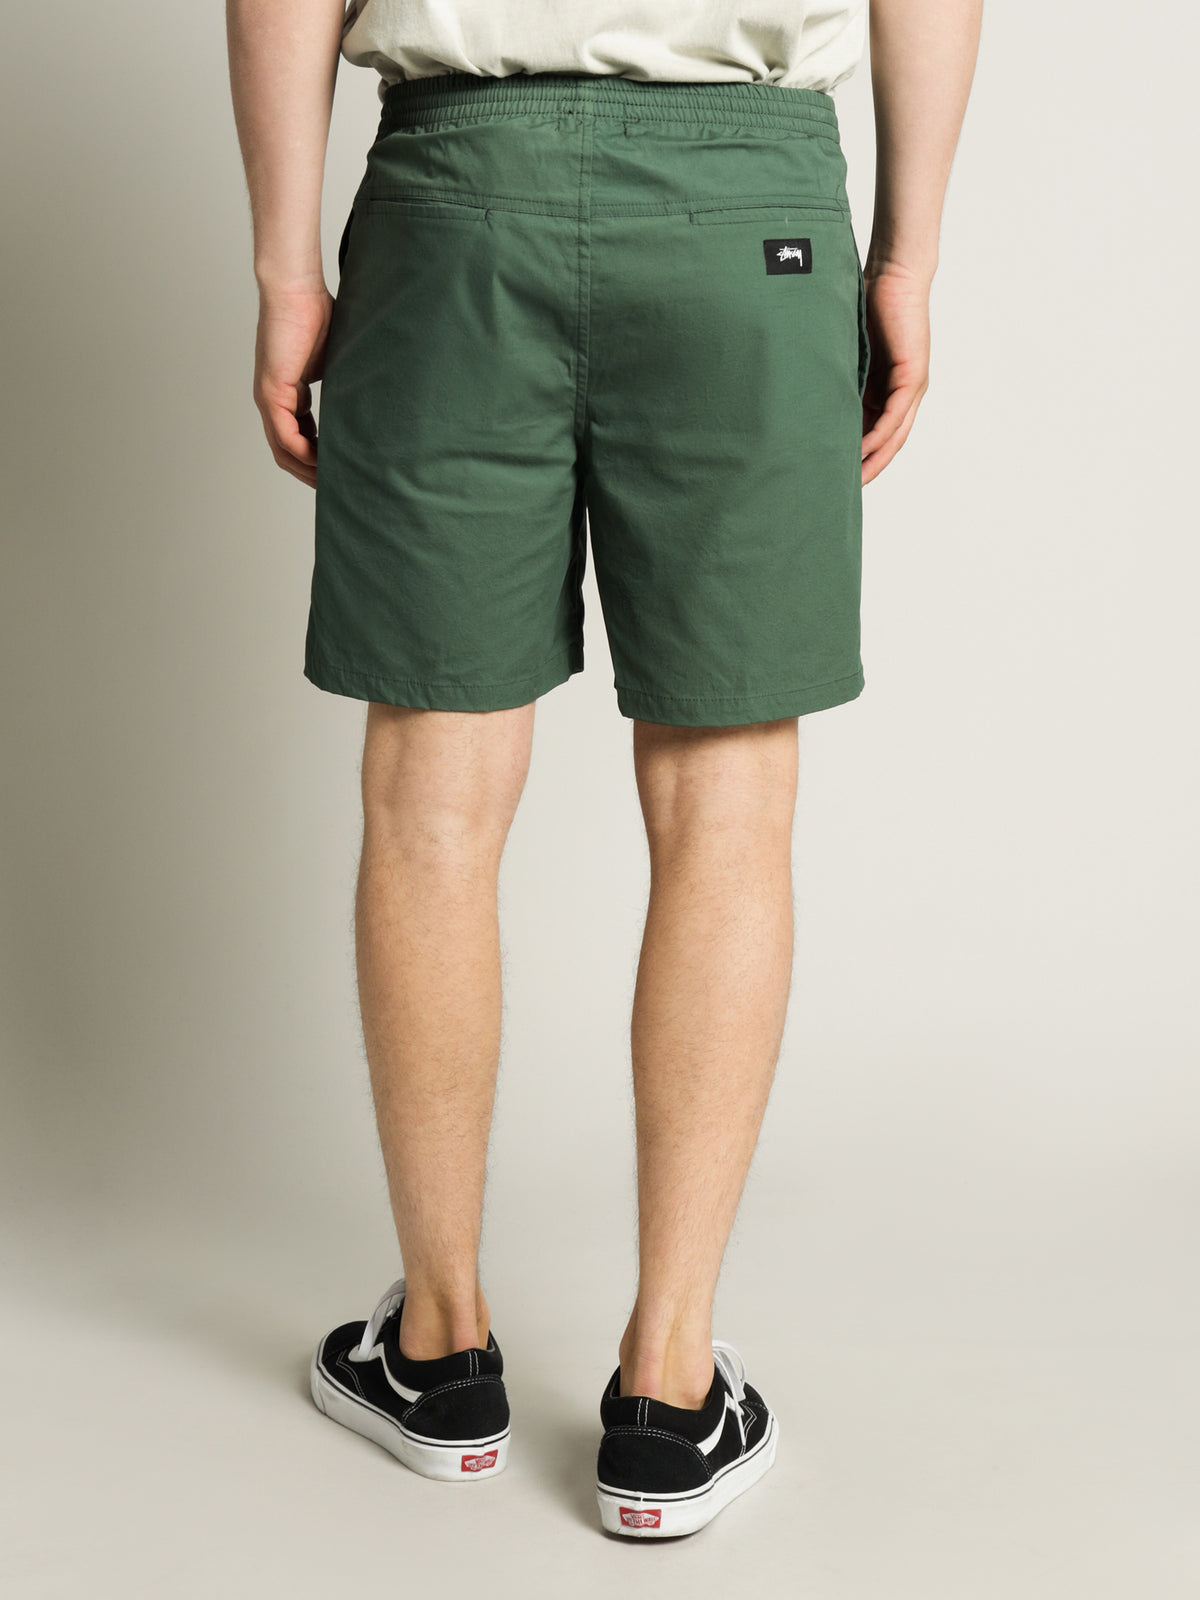 Basic Stock Shorts in Forest